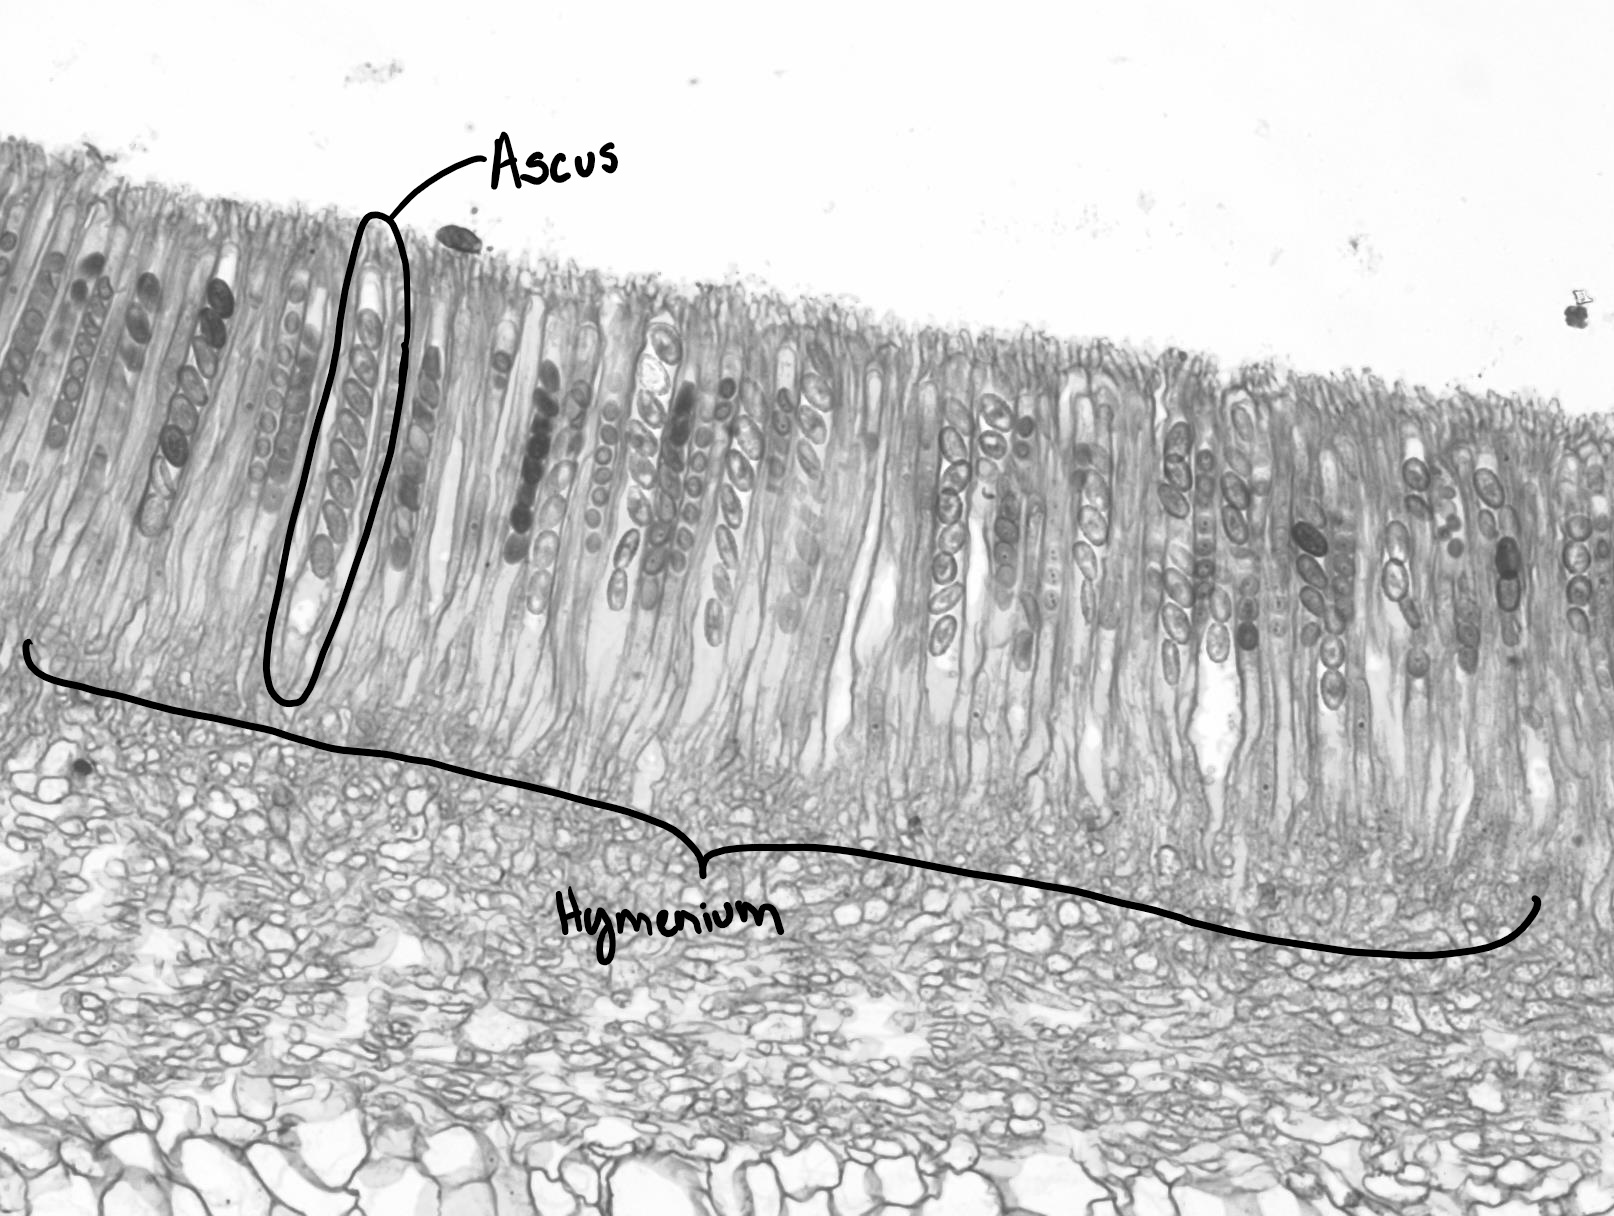 A prepared slide of the hymenium of a cup fungus, showing a row of asci with ascospores (this row is labeled as the hymenium)